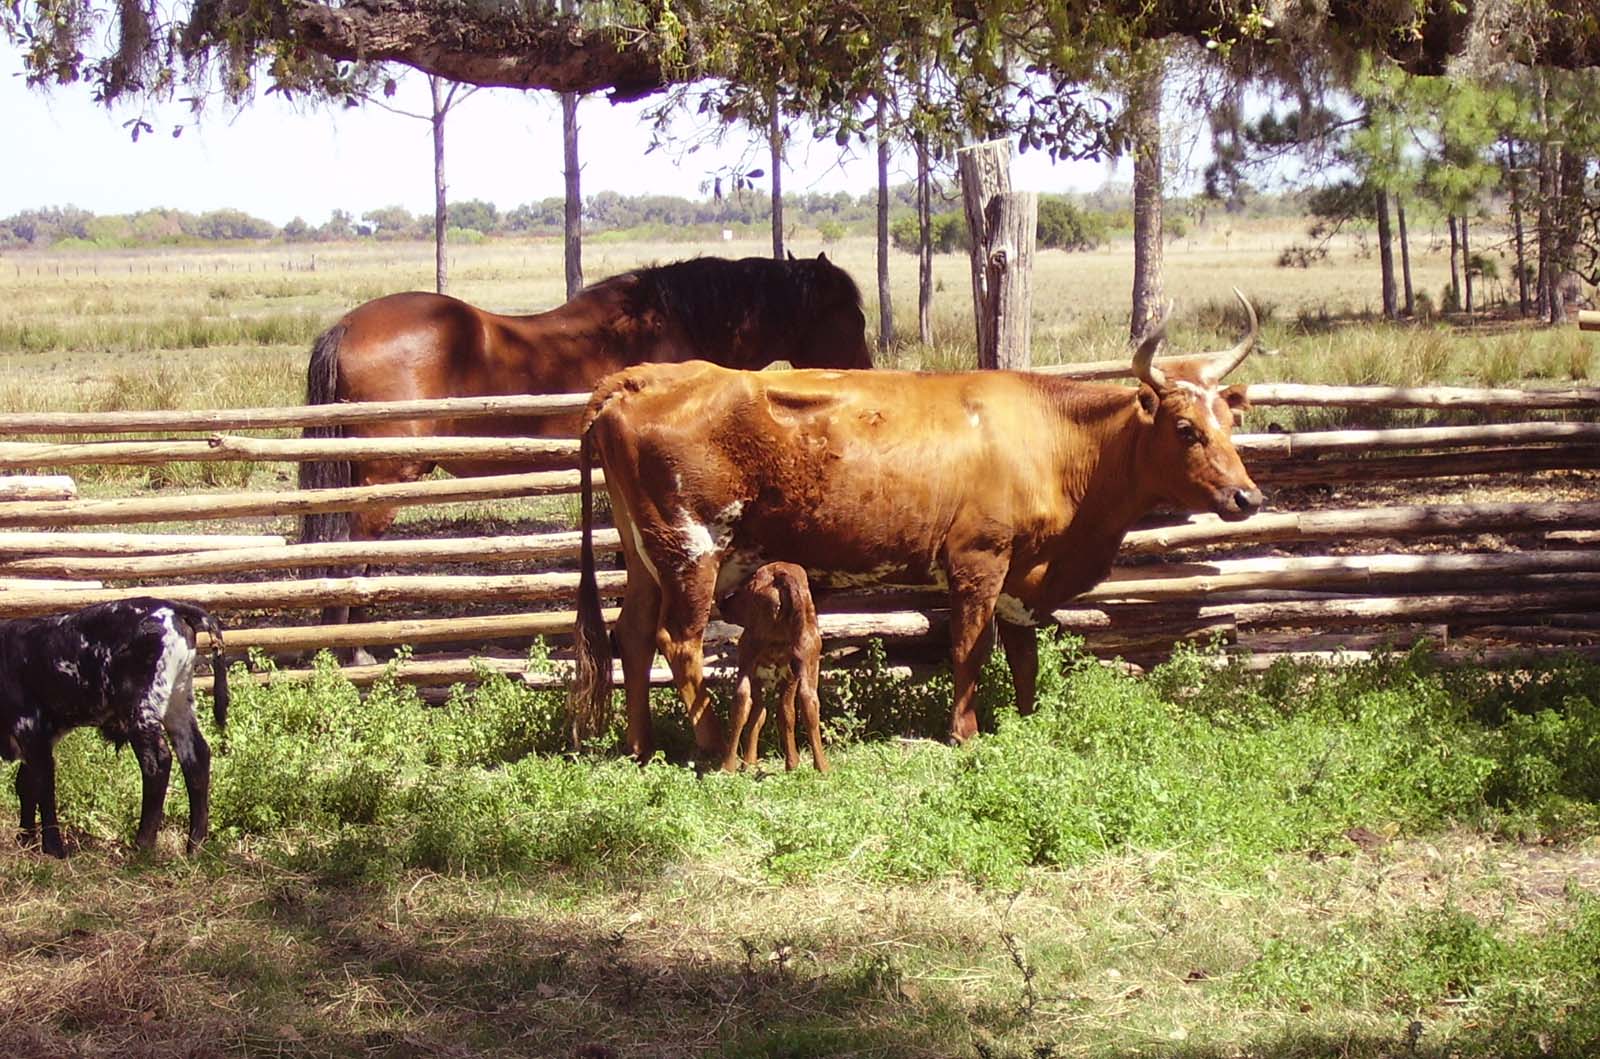 The Cracker cows at Lake Kissimmee State Park are descendents of those brought here by Spanish explorers. (Photo: David Blasco)